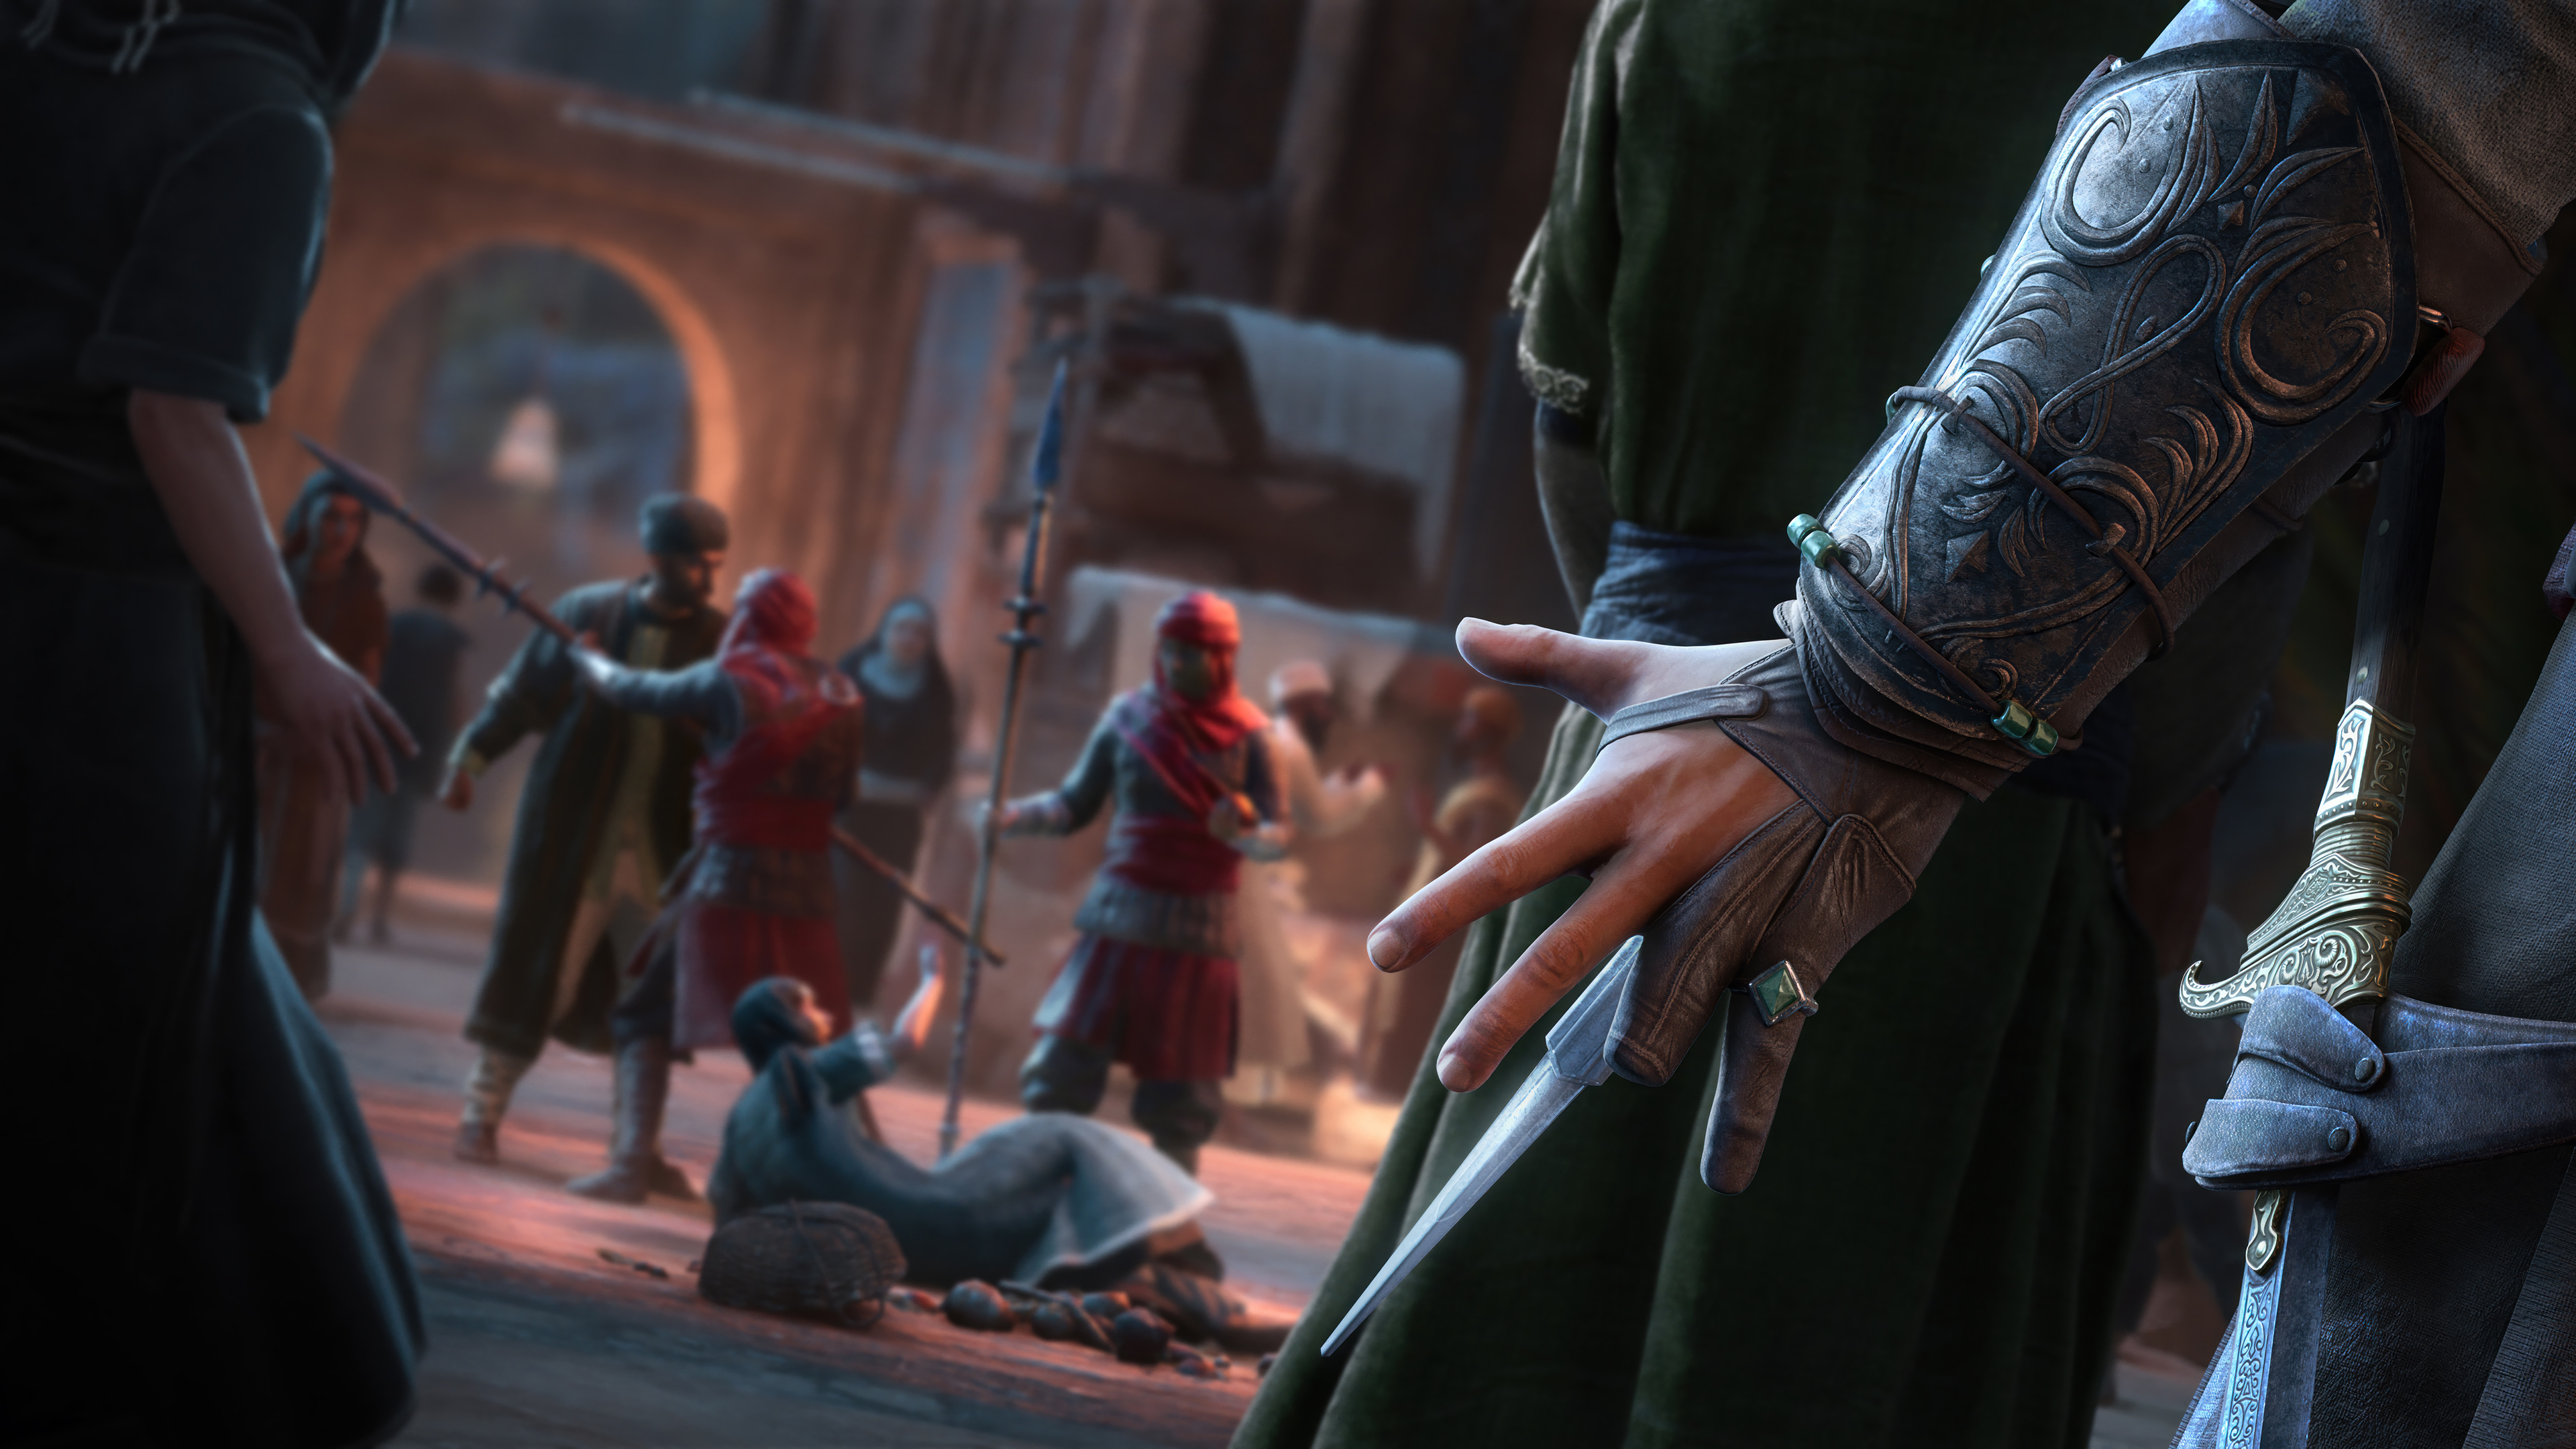 HD desktop wallpaper featuring a scene from Assassin's Creed Mirage with a focus on a character's hands in the foreground, set against the game's vibrant, historical backdrop capturing the tense atmosphere of a stealth mission.